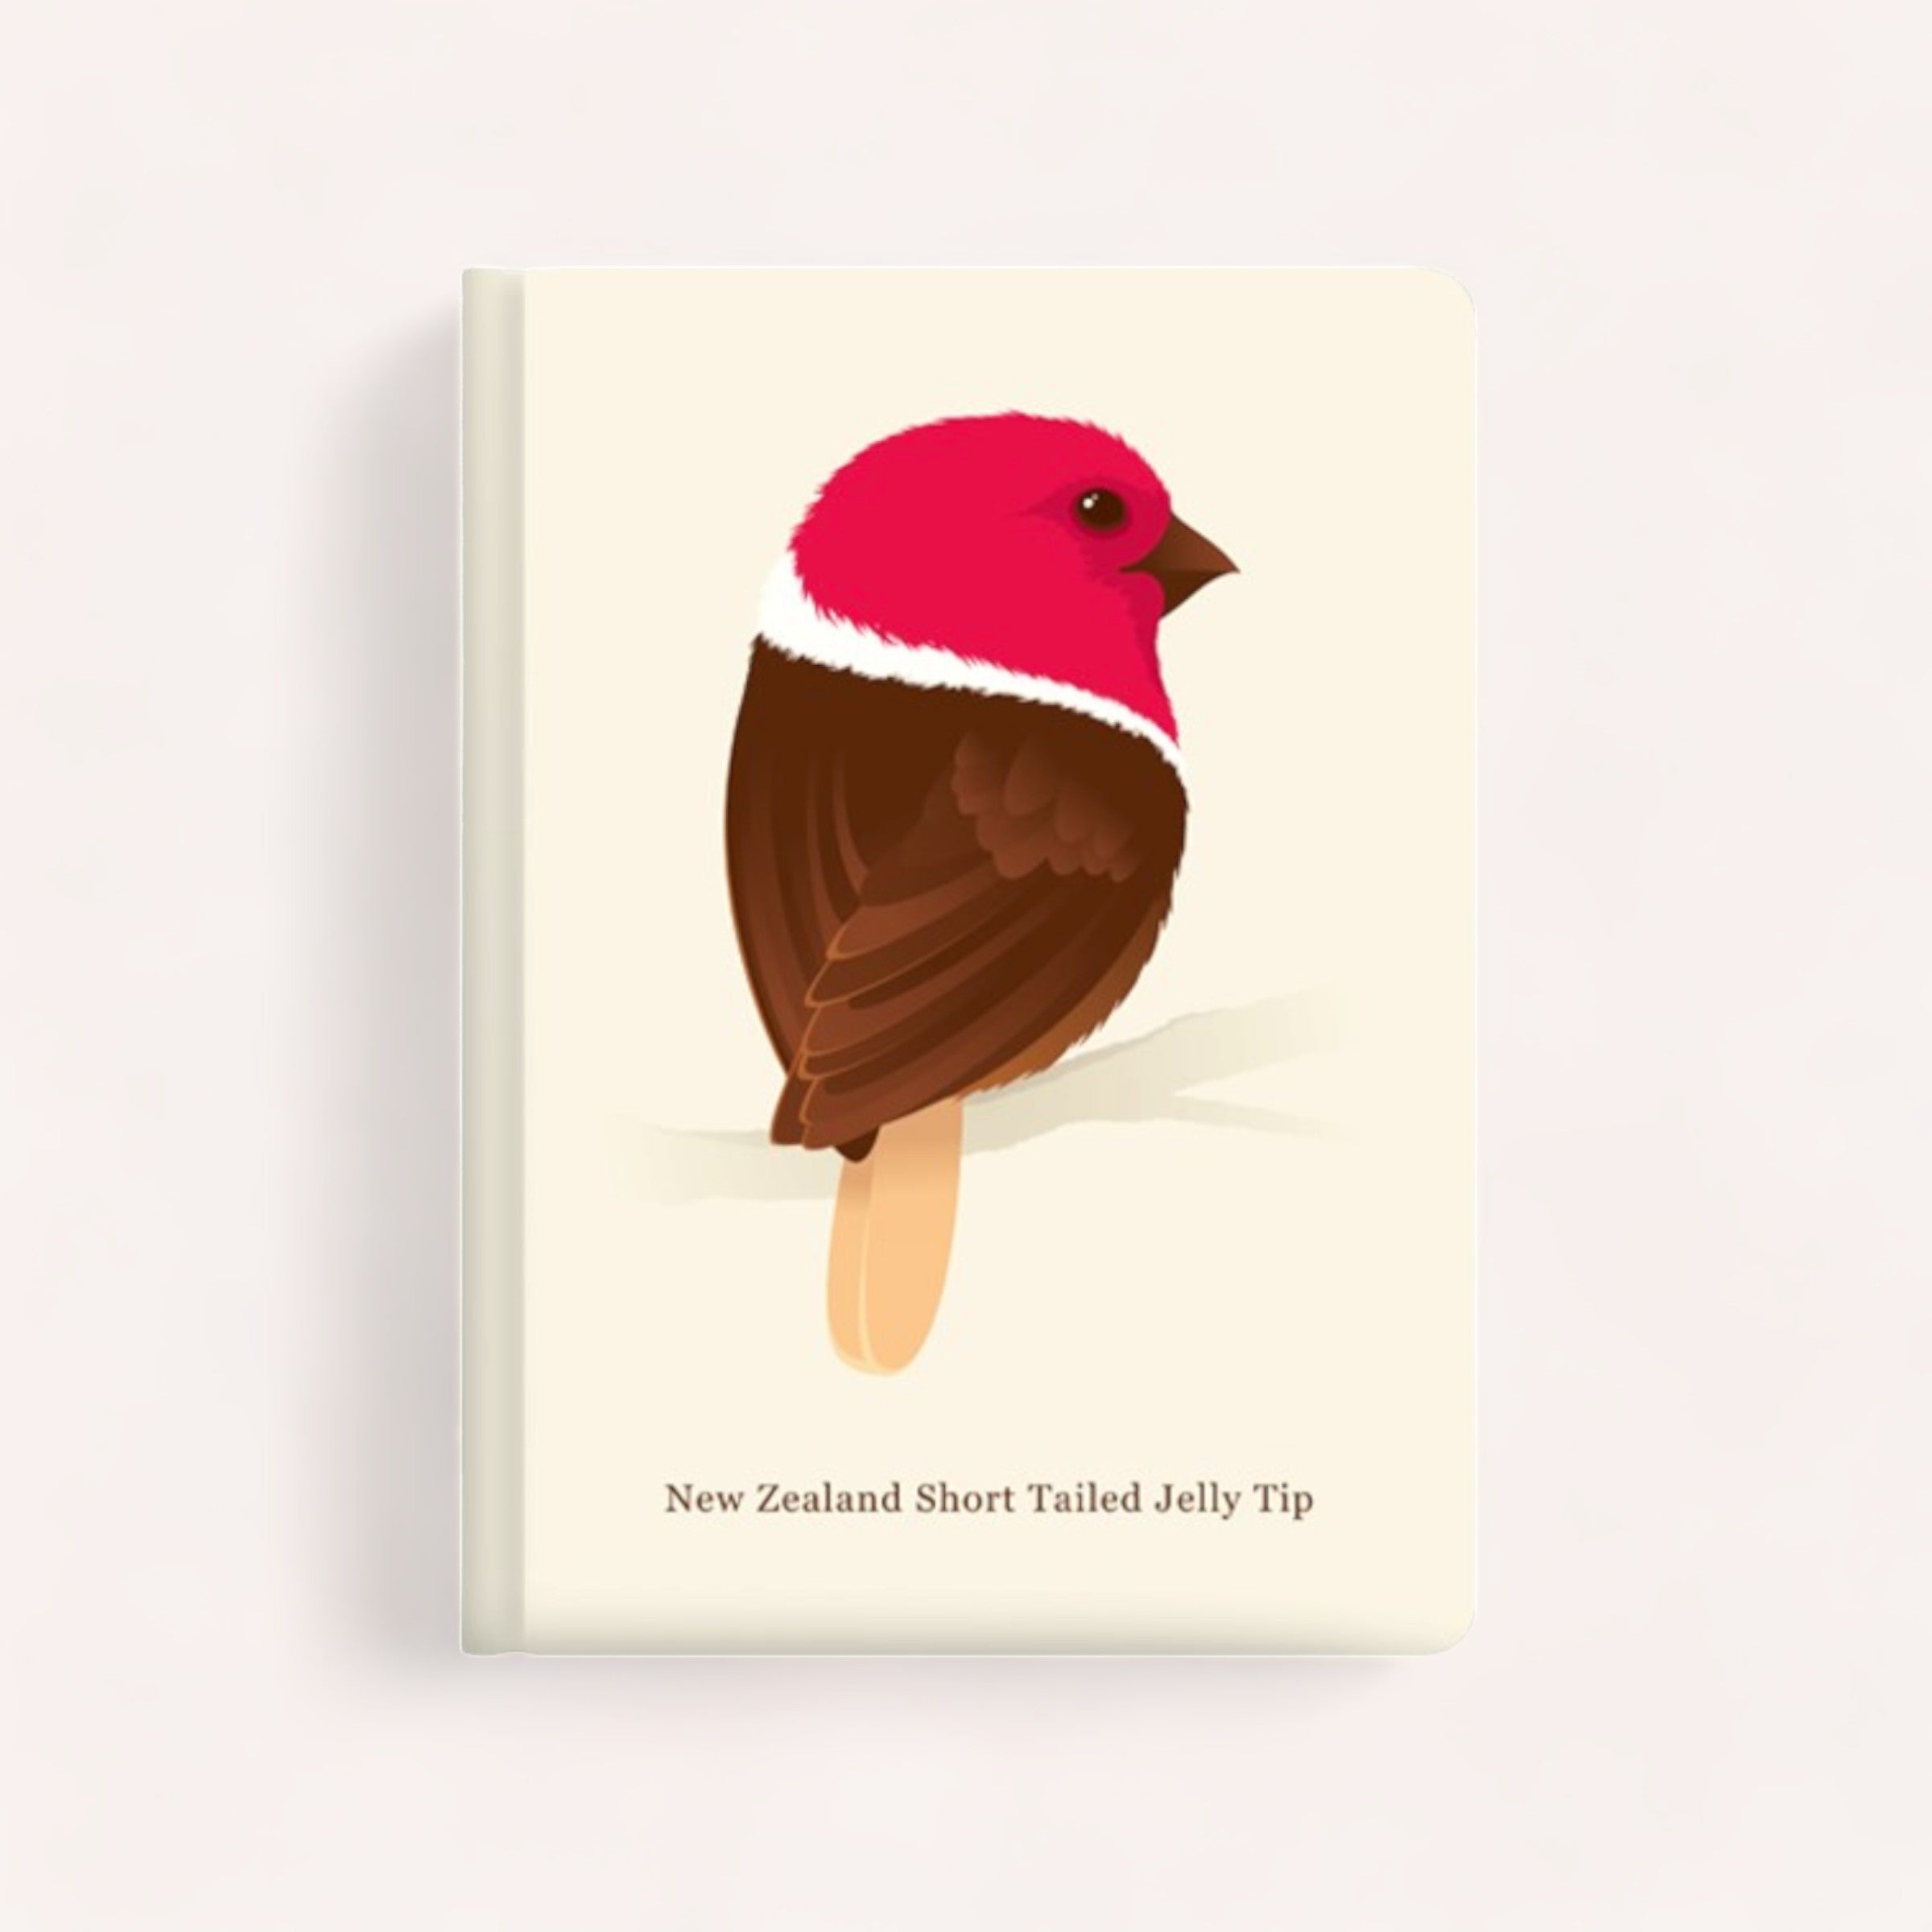 A whimsical Short Tail Jelly Tip Journal cover featuring an illustration of a bird with the body of a chocolate ice cream bar on a stick, humorously named "New Zealand short-tailed jelly tip," by Glenn Jones Accessories.